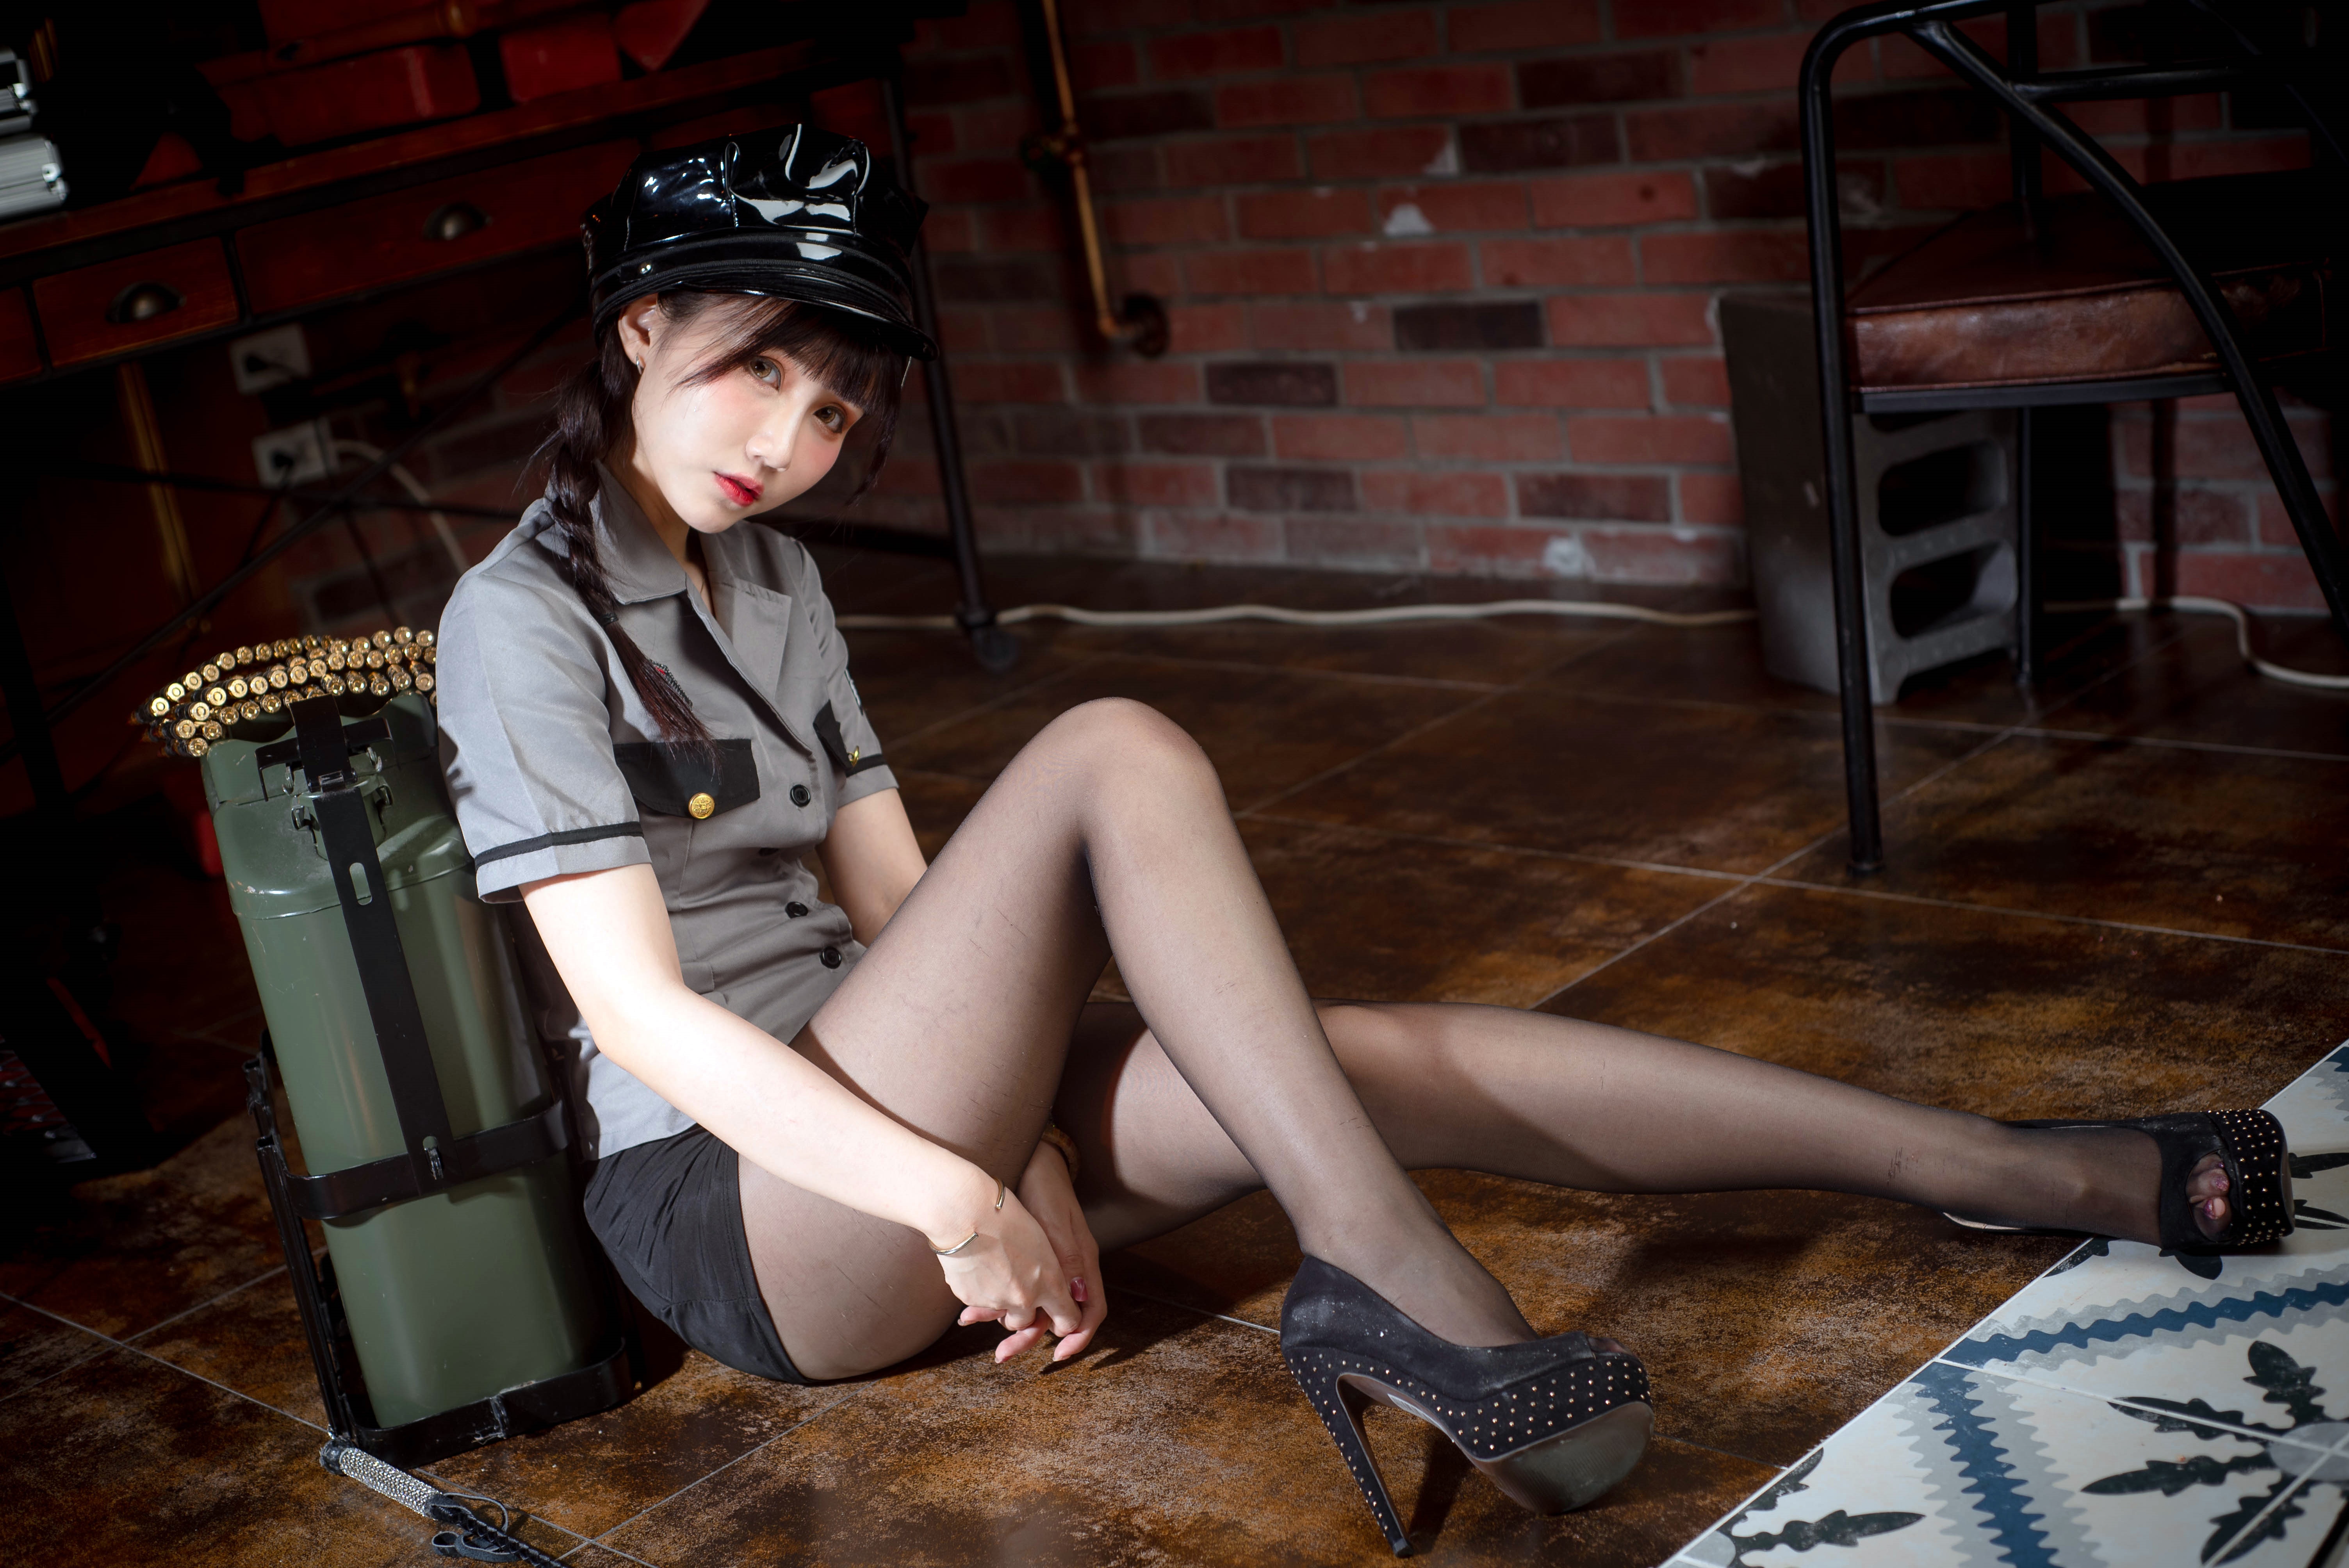 People 6016x4016 Asian model women long hair dark hair sitting police costume hat bricks wall ammunition whips high heels chair braids ponytail carpet fuel canister power cord leaning looking at viewer pantyhose